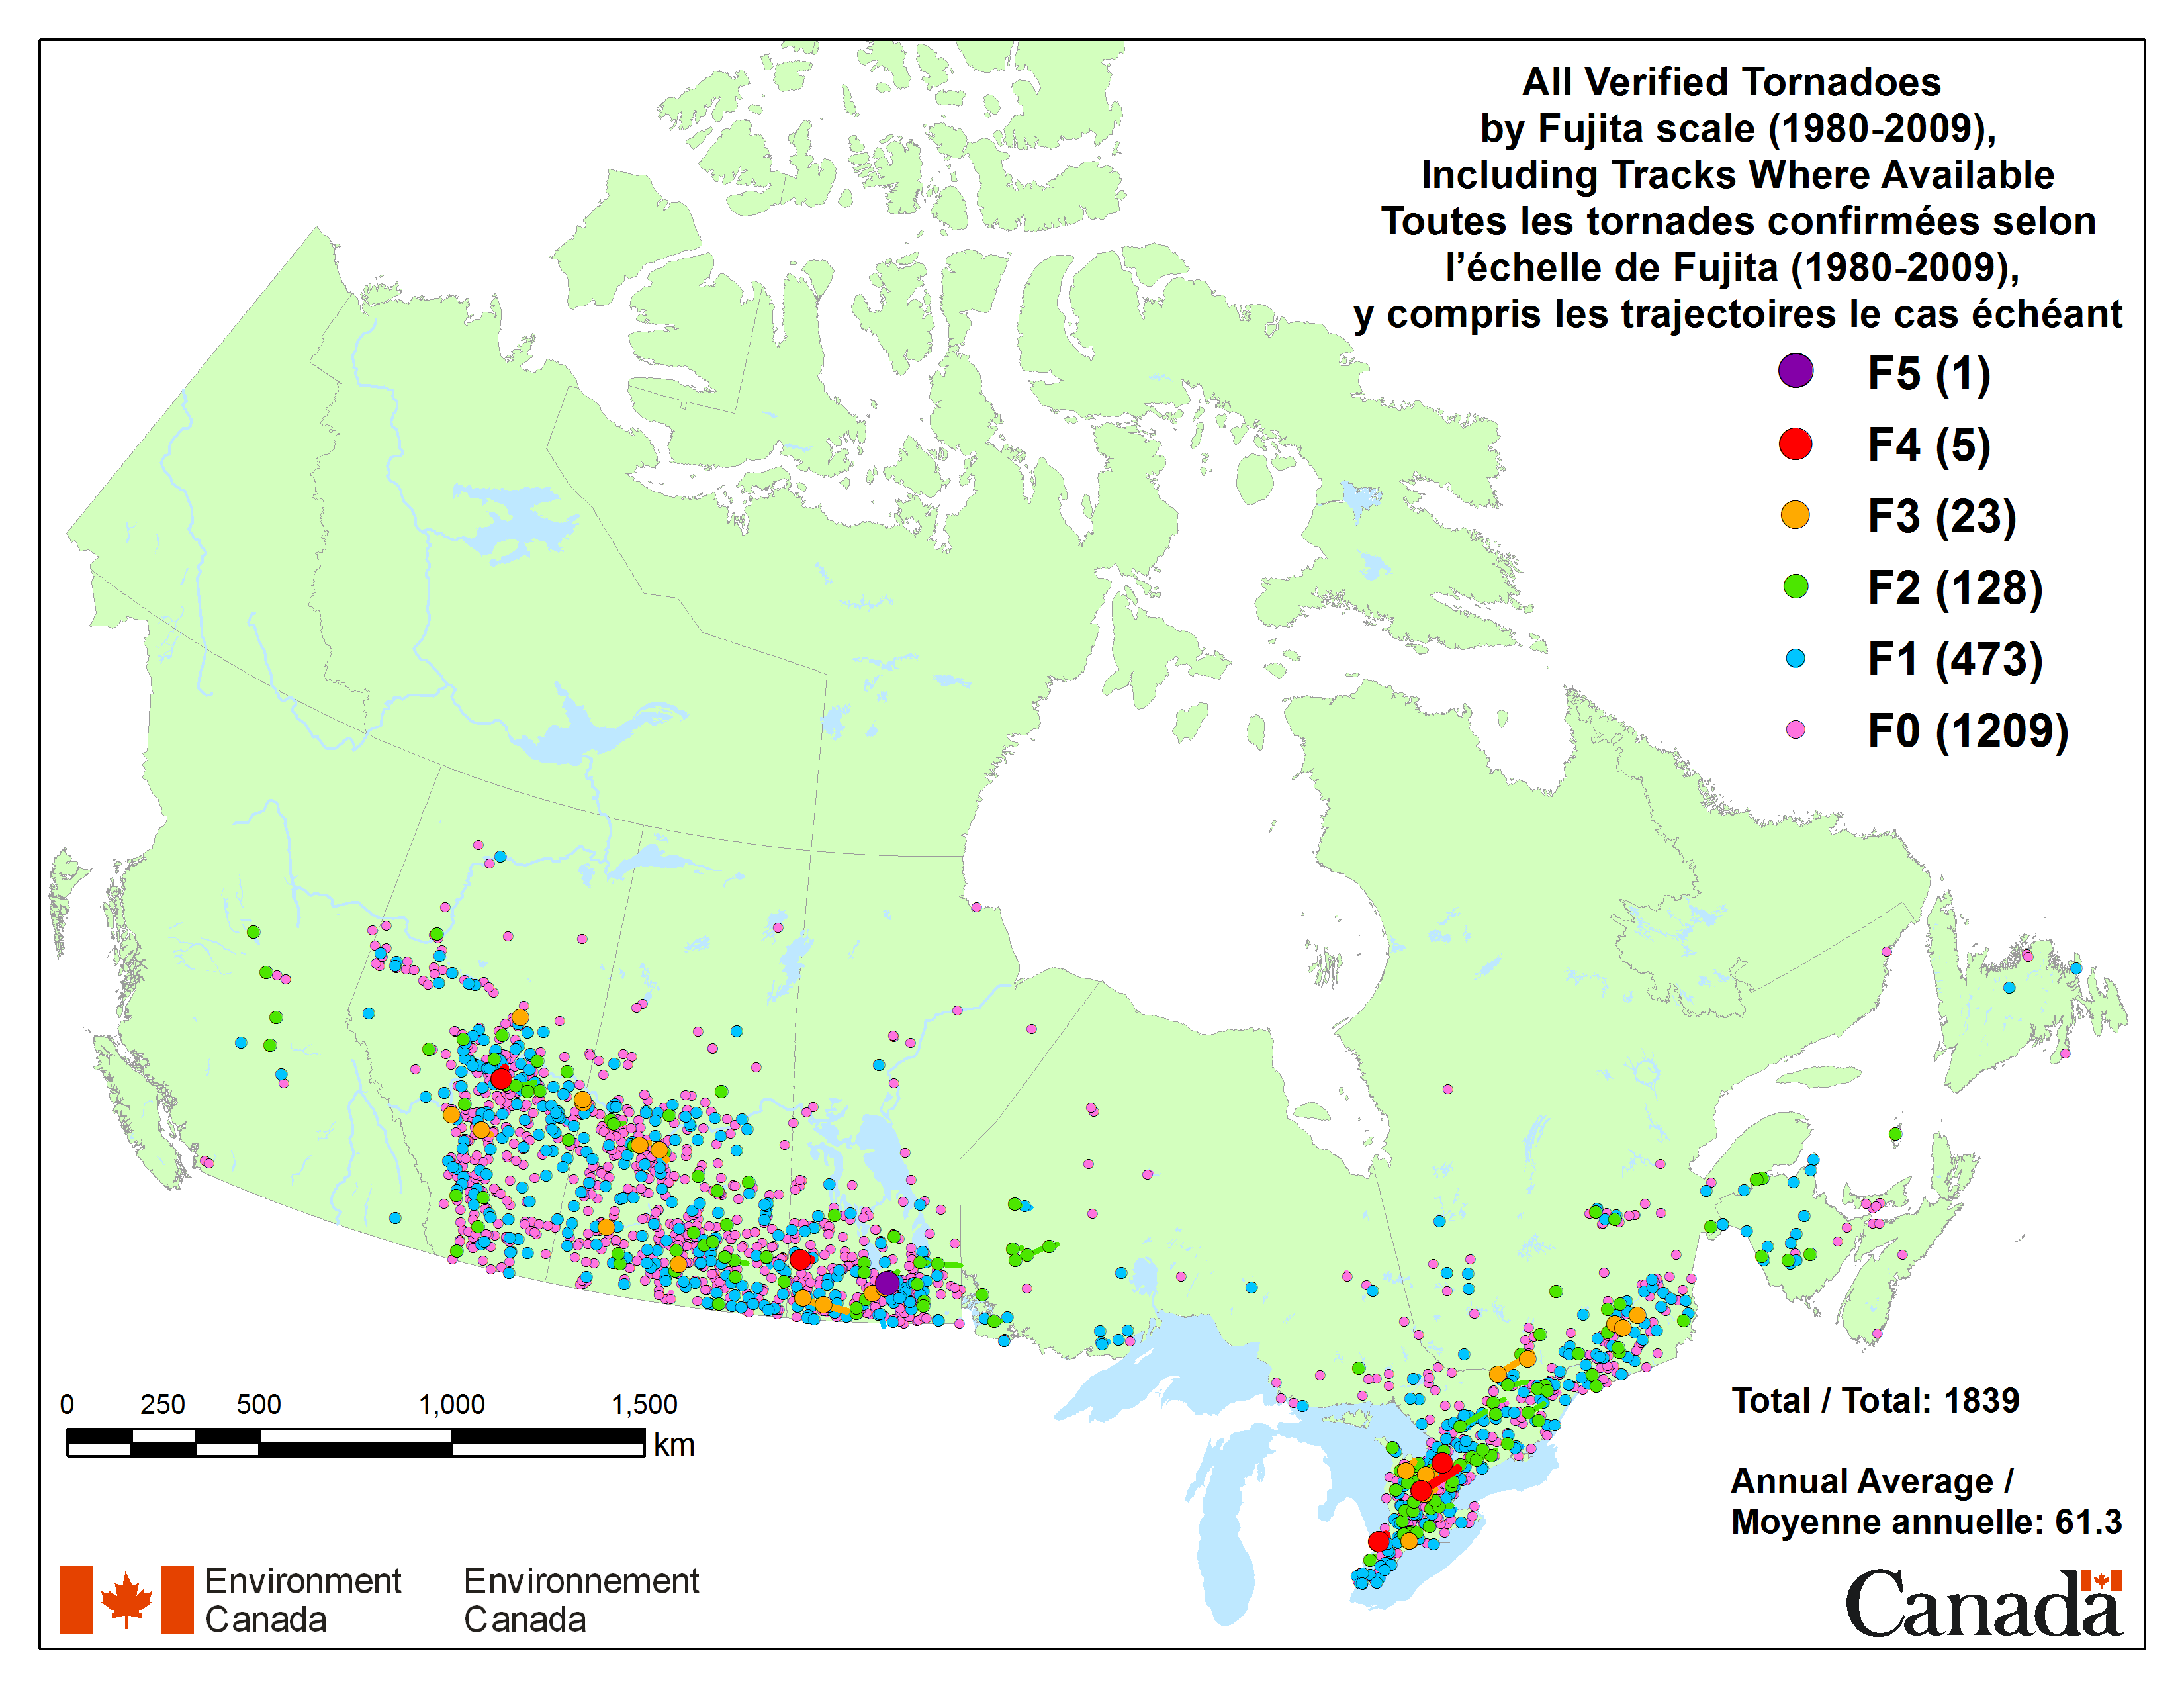 Geological map of Canada that represents areas affected by tornados